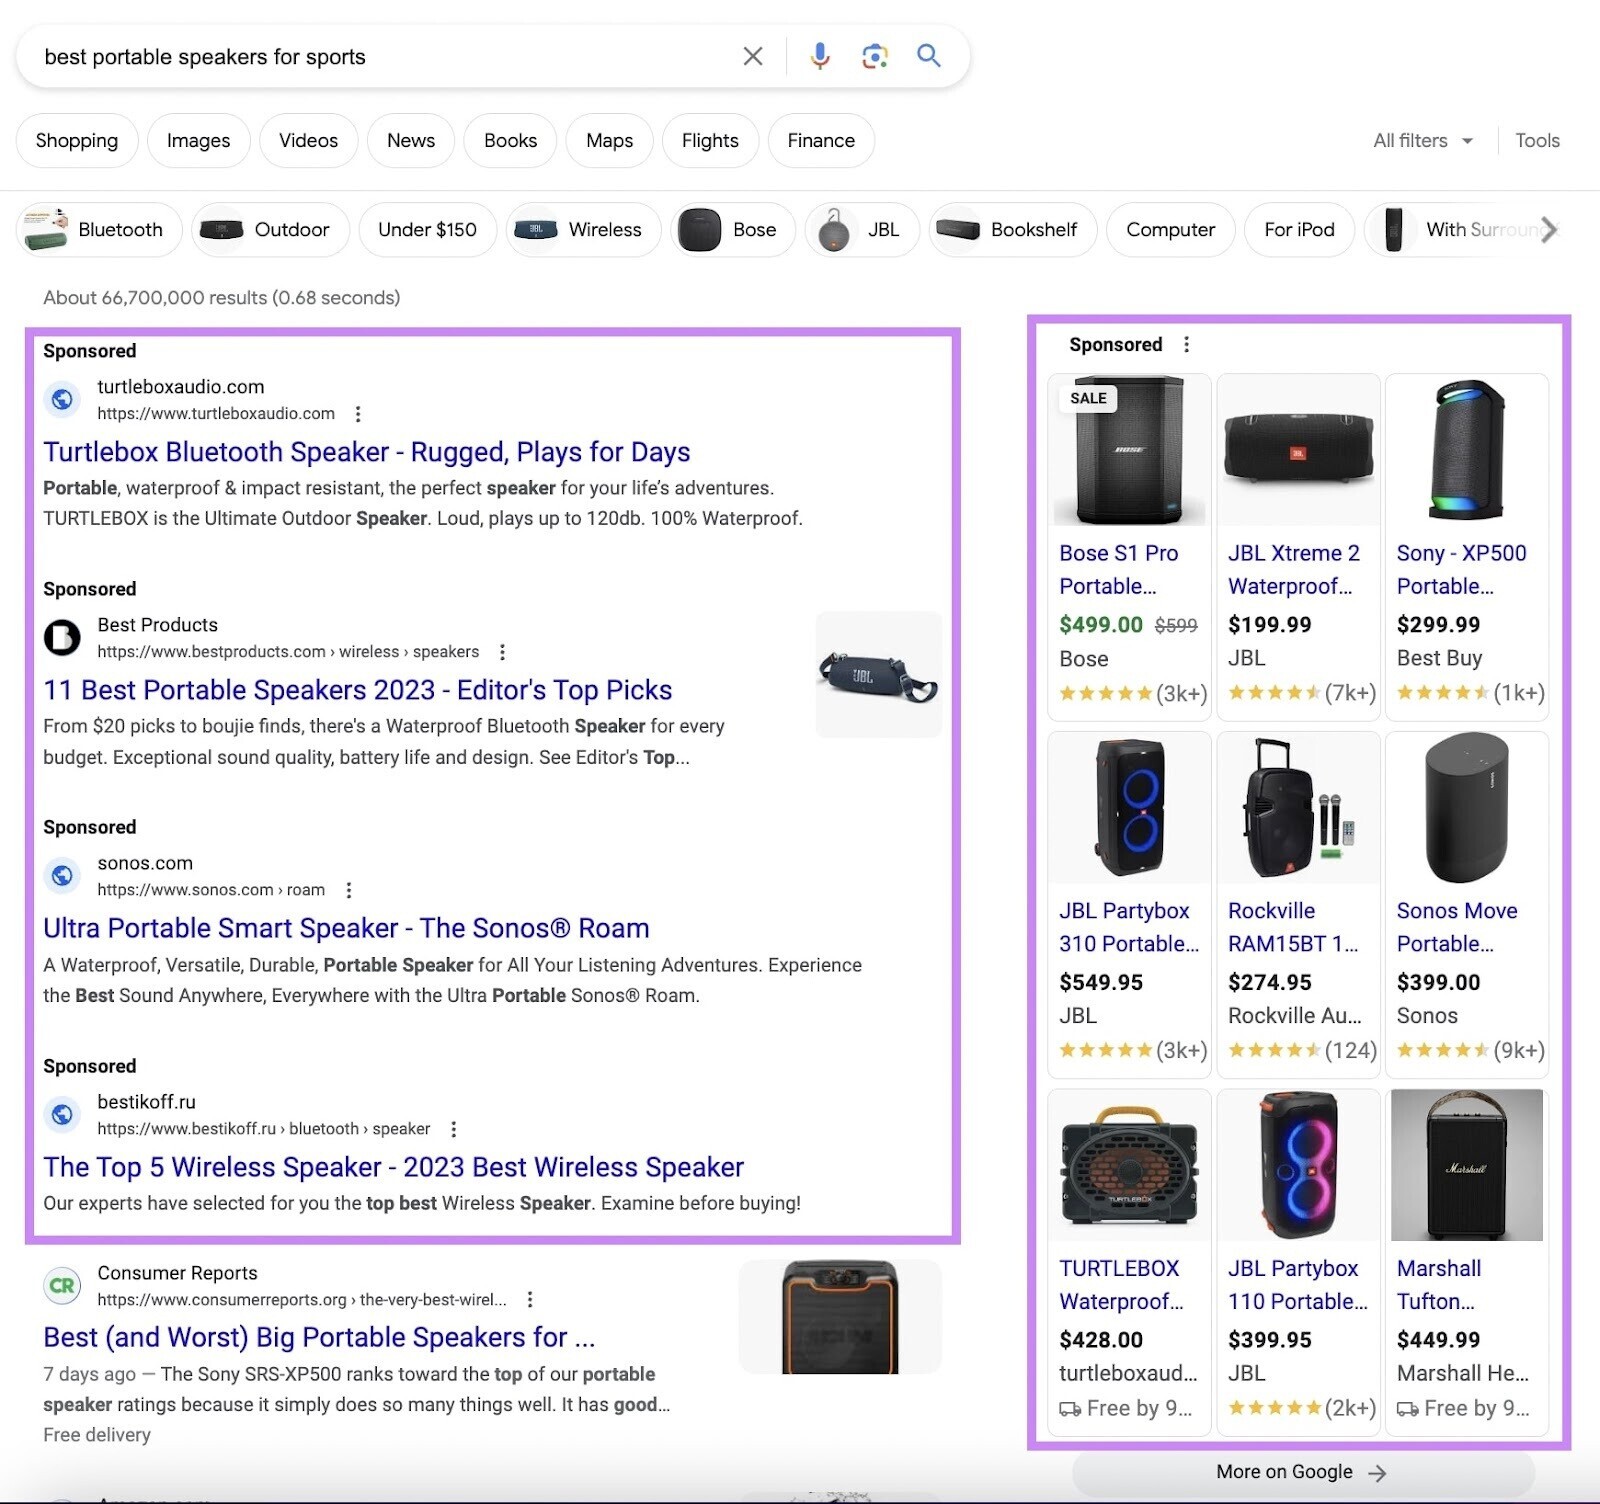 Google SERP for "best portable speakers for sports" search with ads highlighted in purple